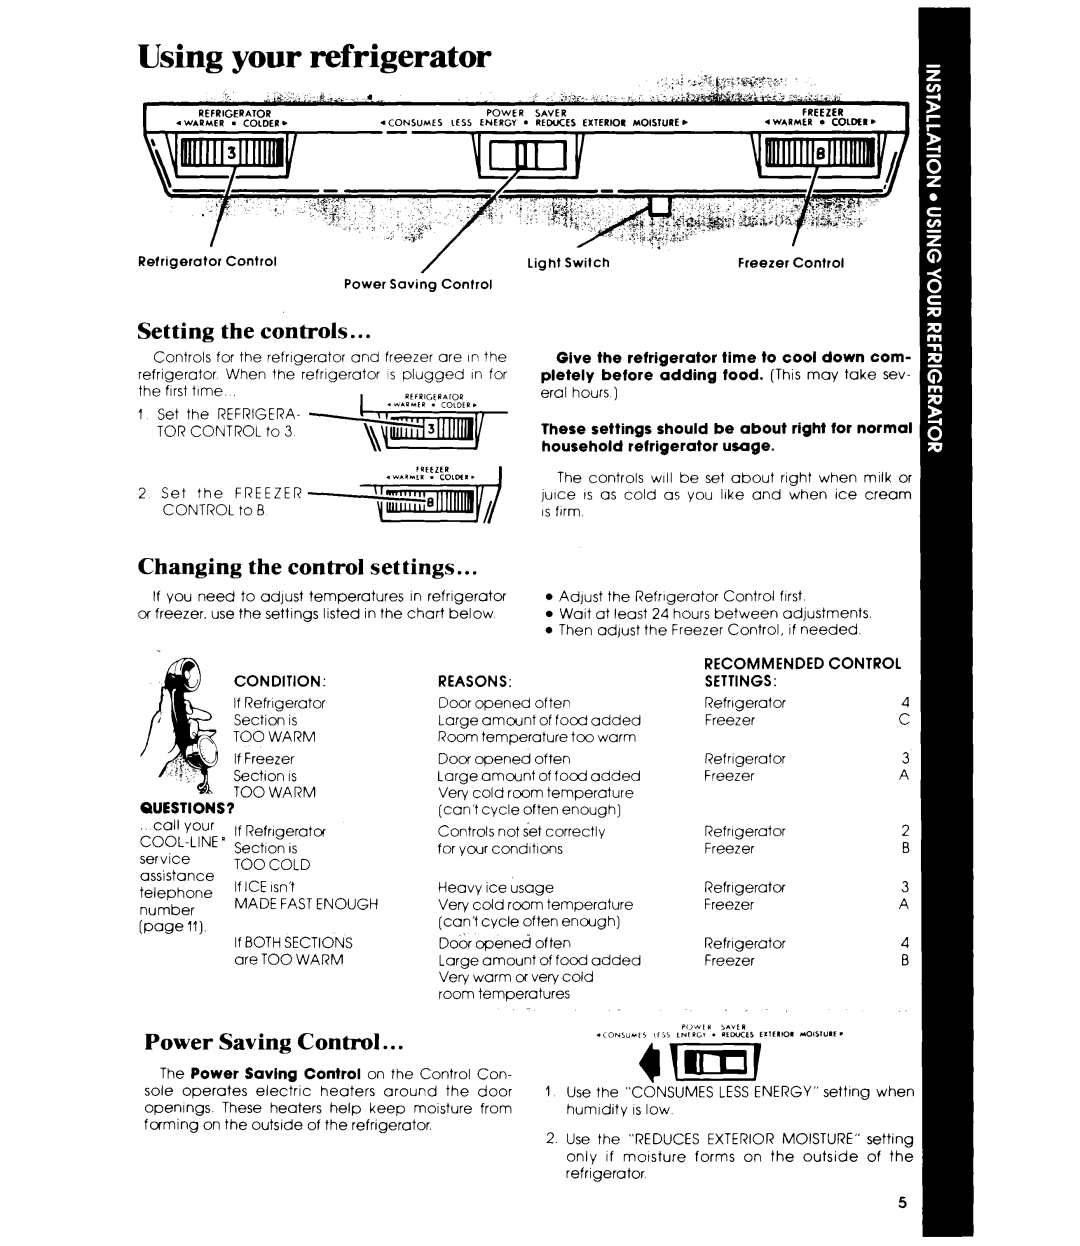 Whirlpool ET16EP manual Using your refrigerator, Setting the controls, Changing the control settings, Power Saving Control 